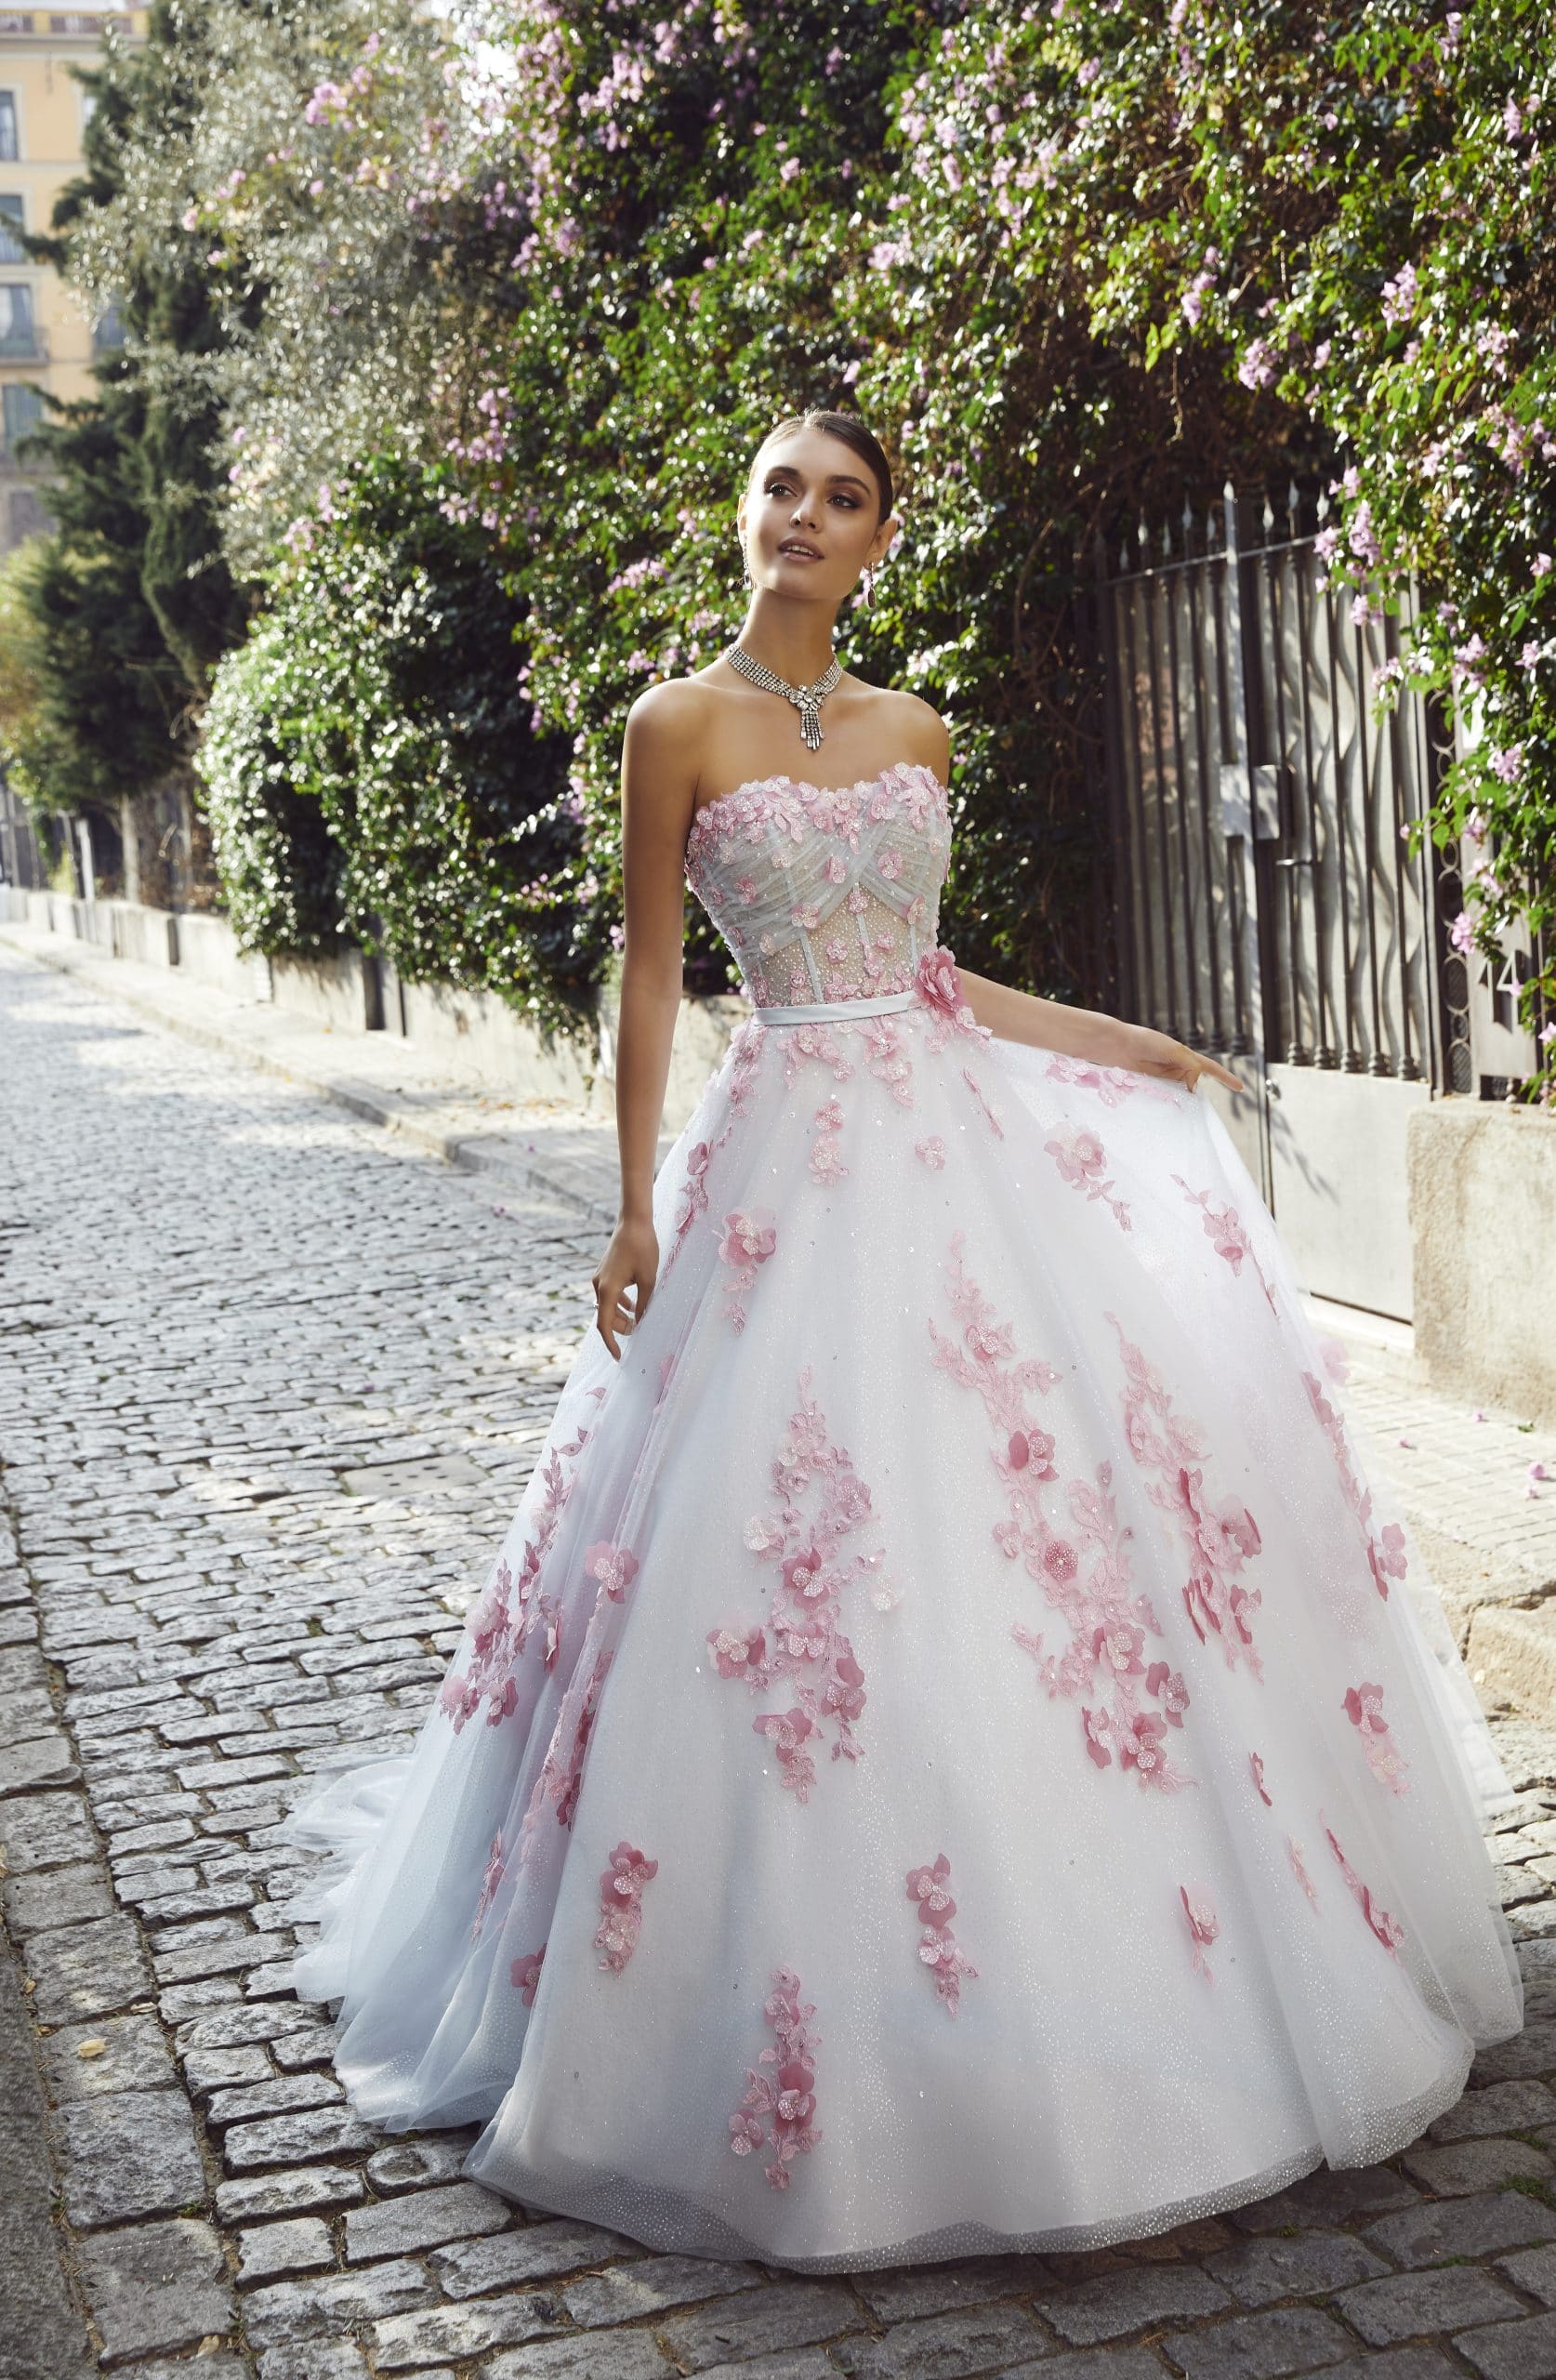 11 Floral Embroidered Wedding Dresses To Make A Statement